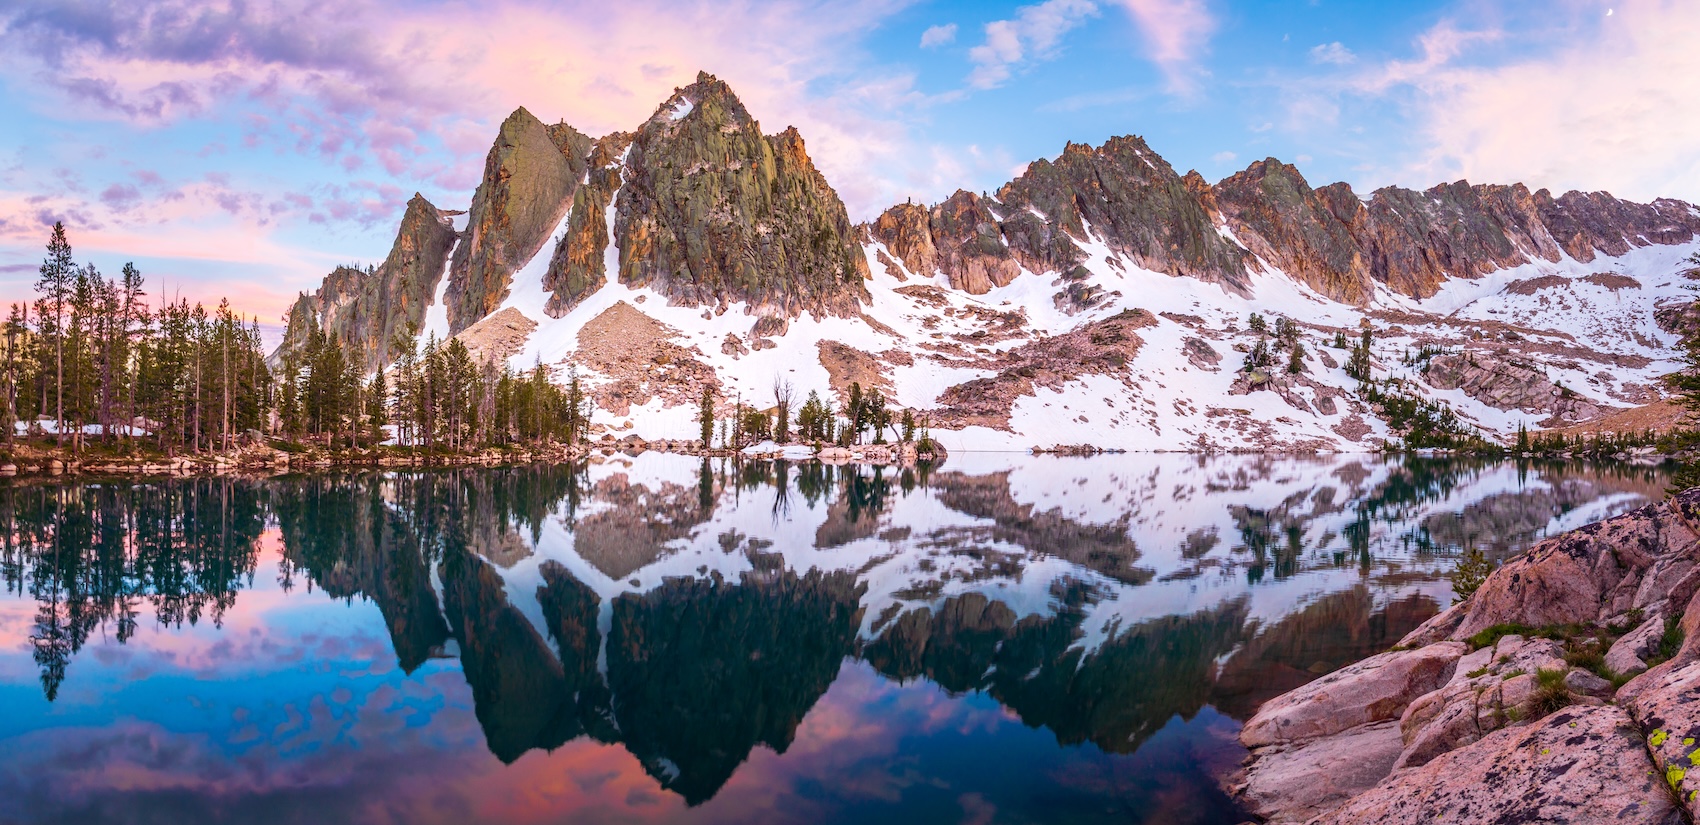 Lucille Lake in Idaho's Sawtooth Mountains